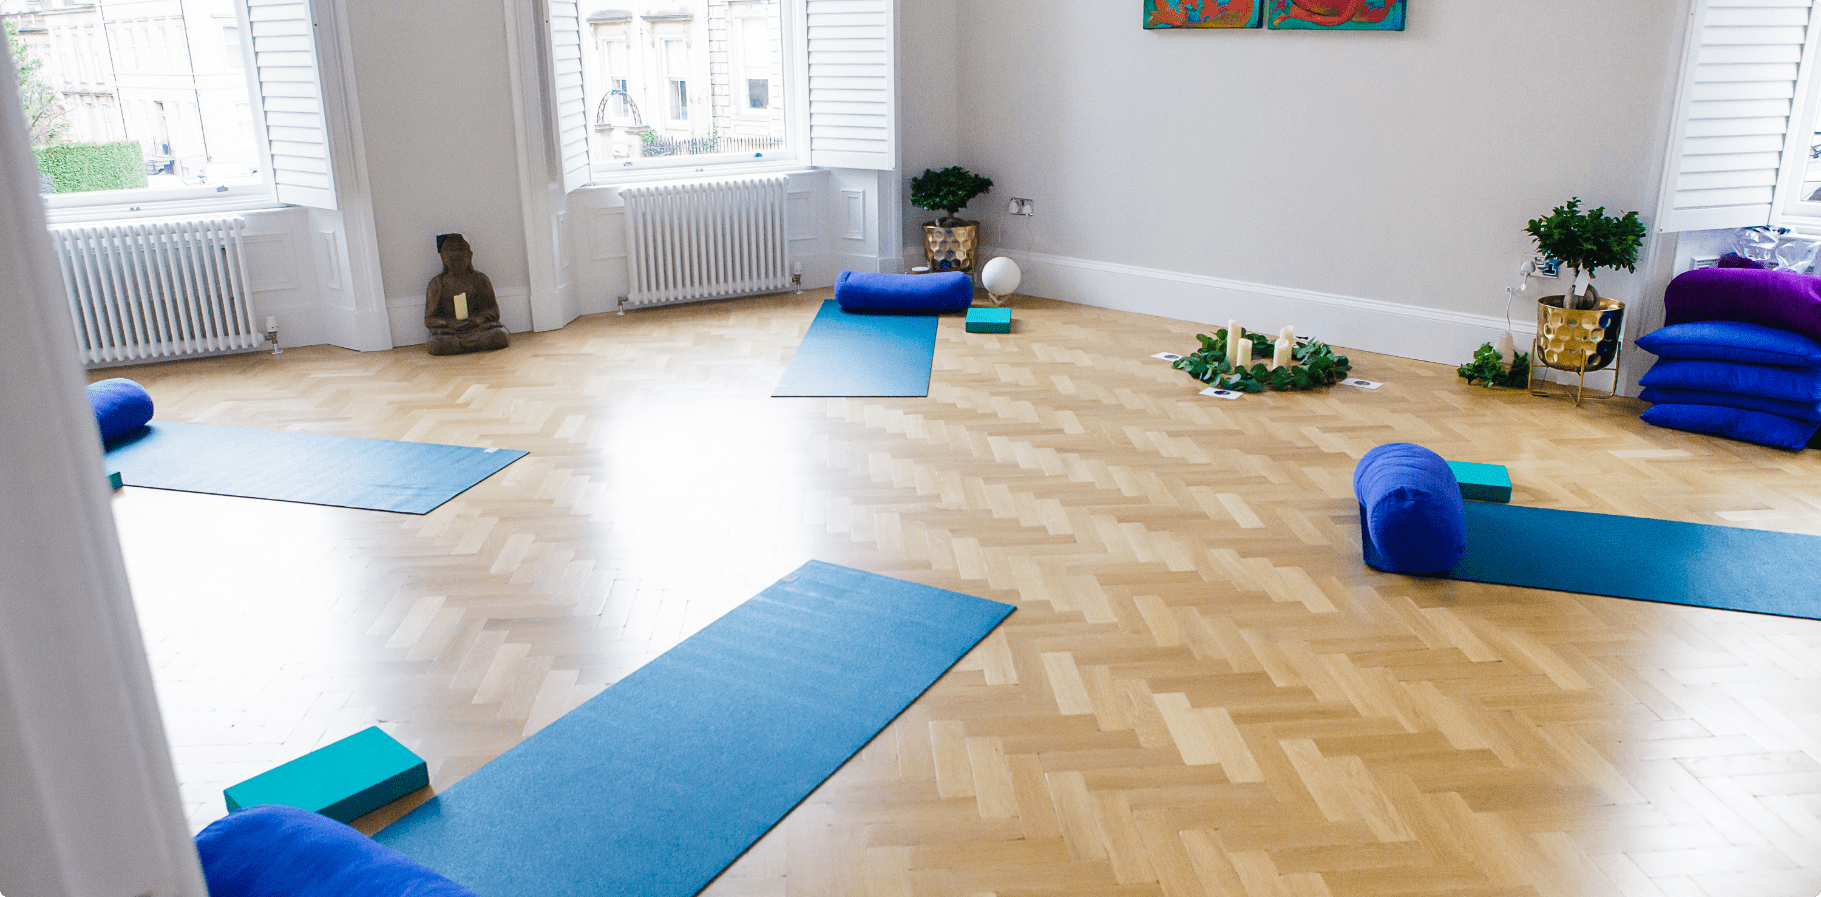 The Key Architectural Elements Required to Design Yoga Studio